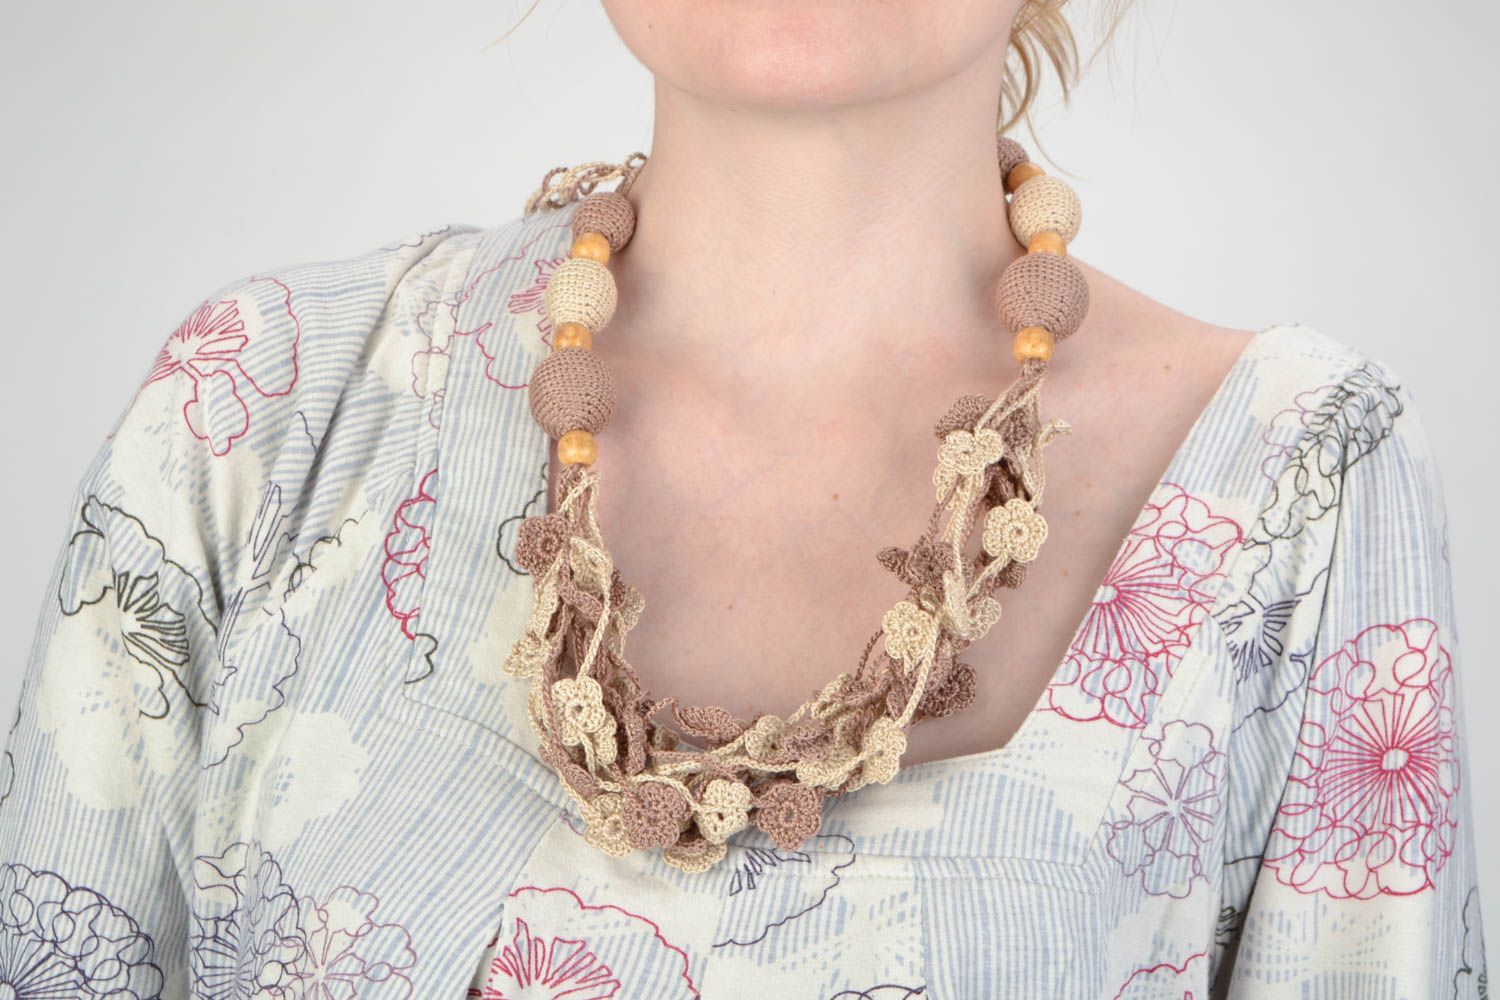 Handmade women's crochet necklace with wooden beads and flowers photo 1